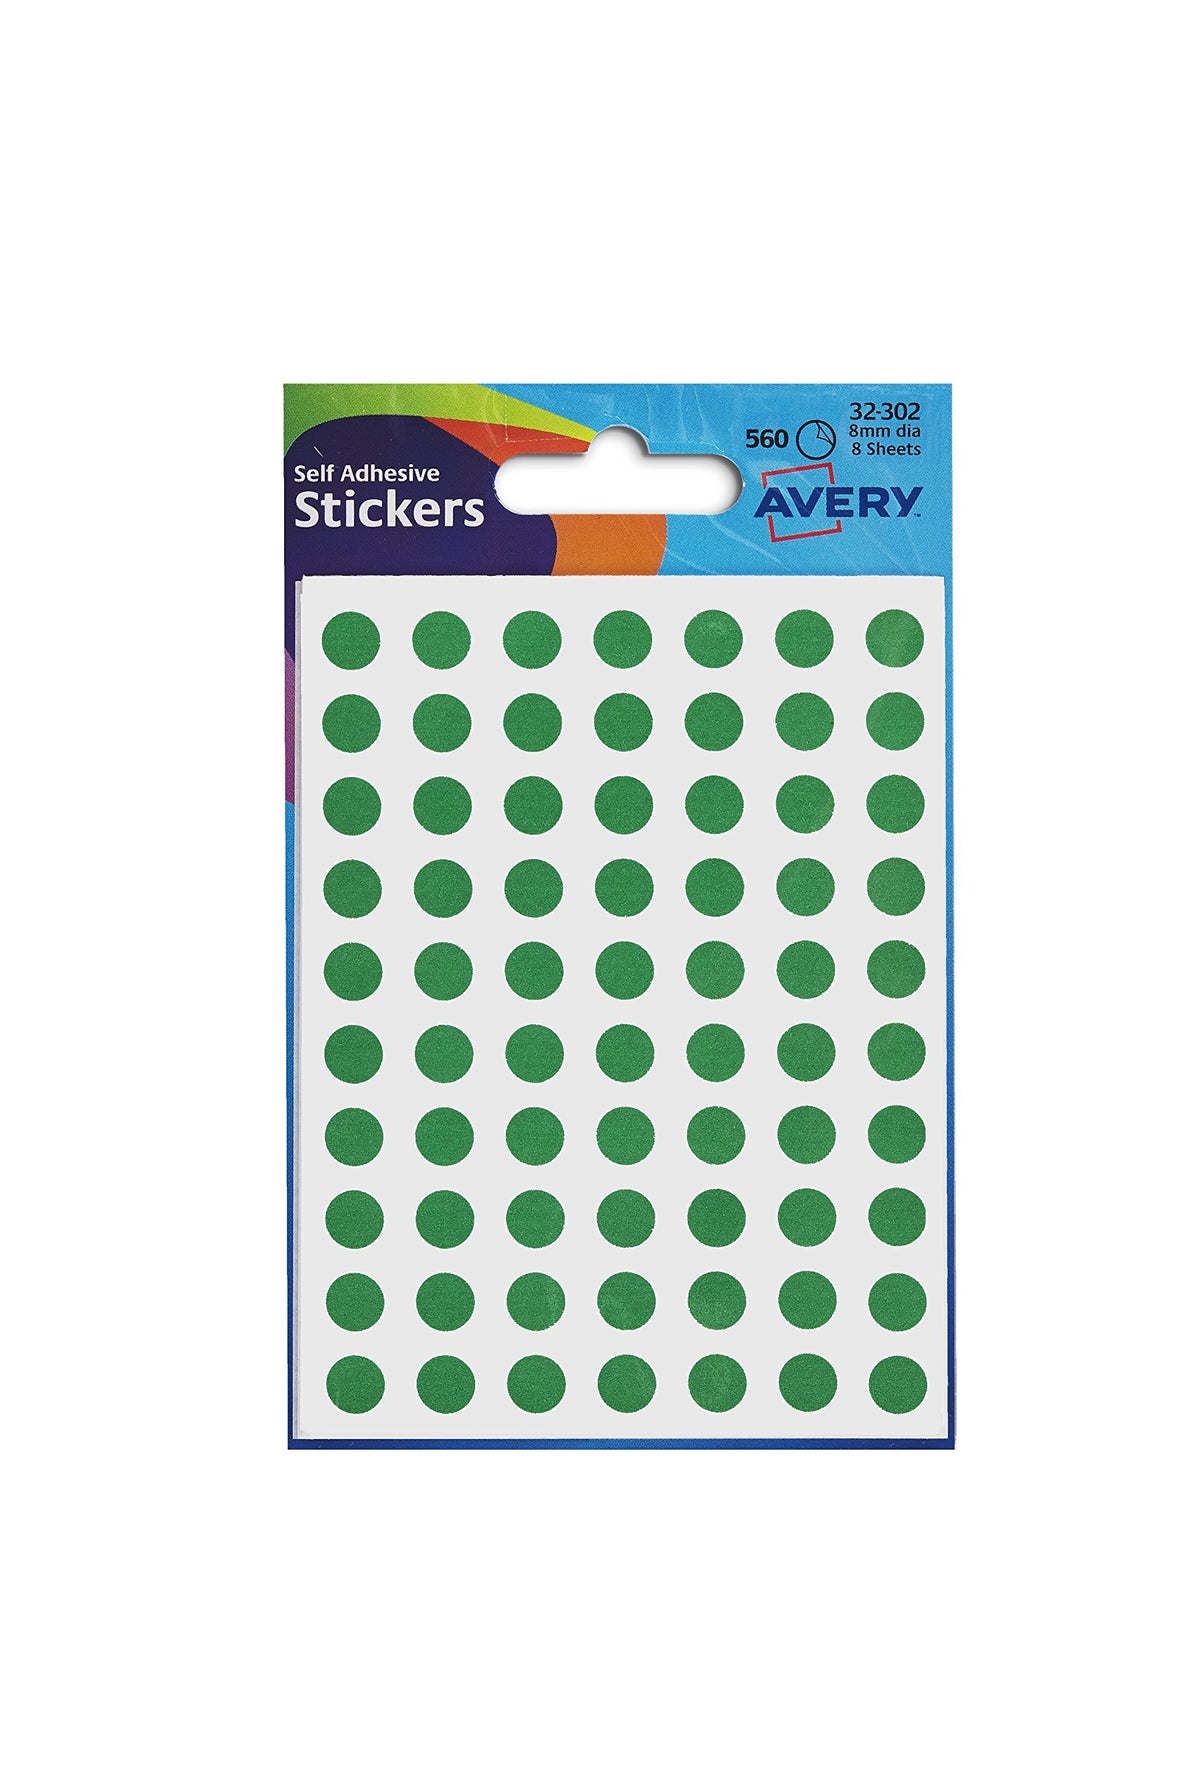 Avery Color Coding Dot Stickers - Green, 560 Stickers, 32-302